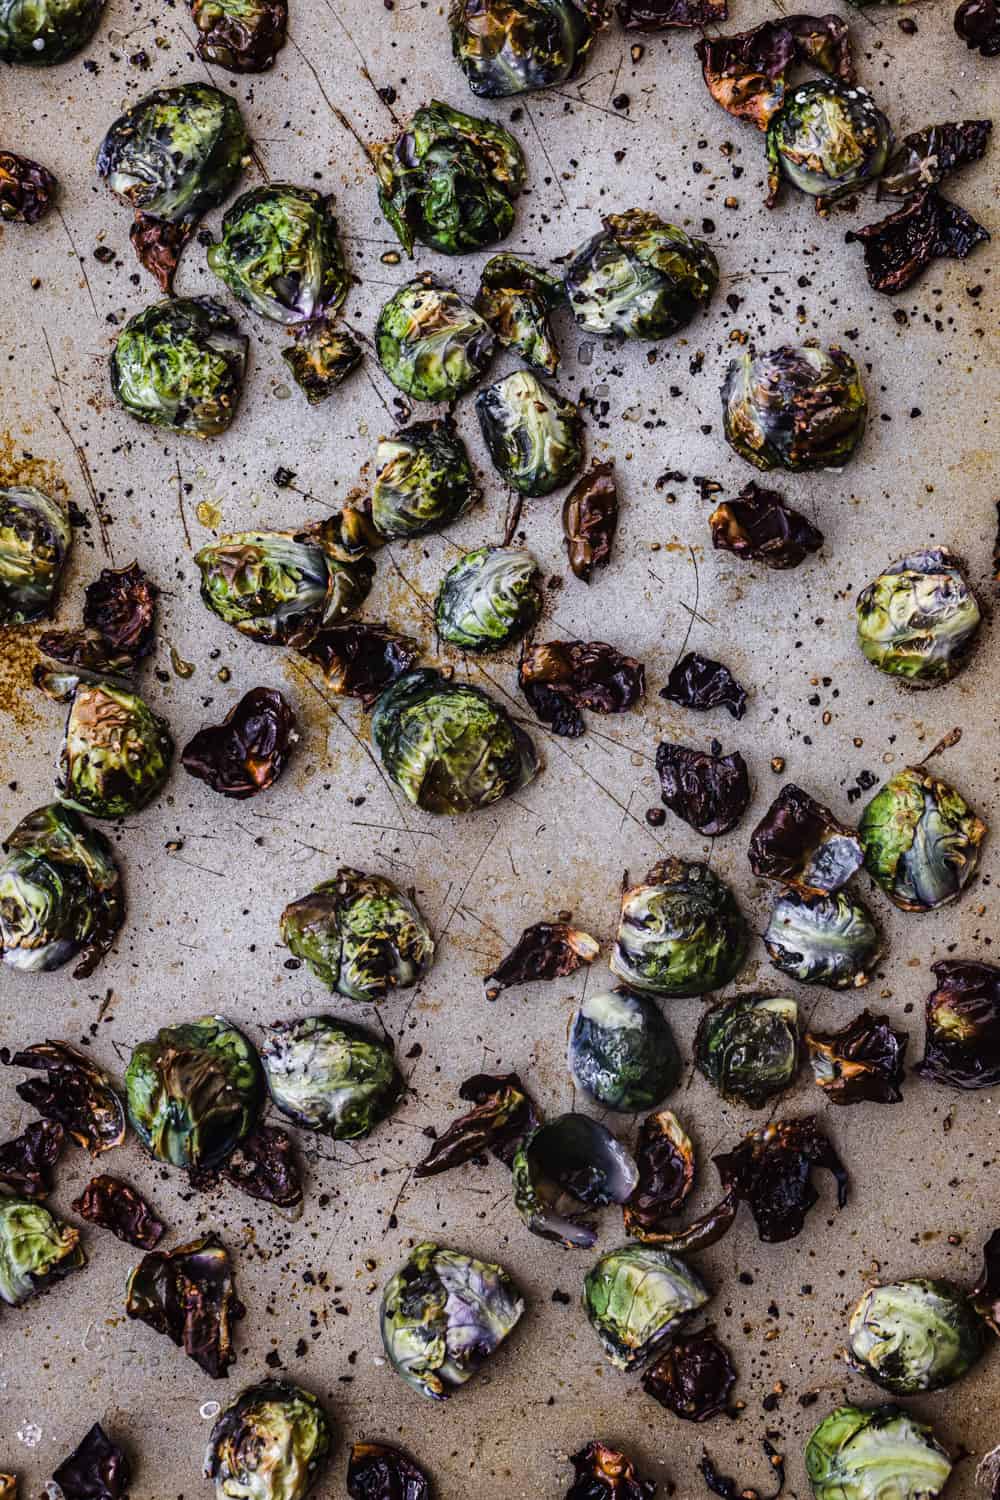 up close shot of brussel sprouts just out of the oven to be used in the farmers market salad